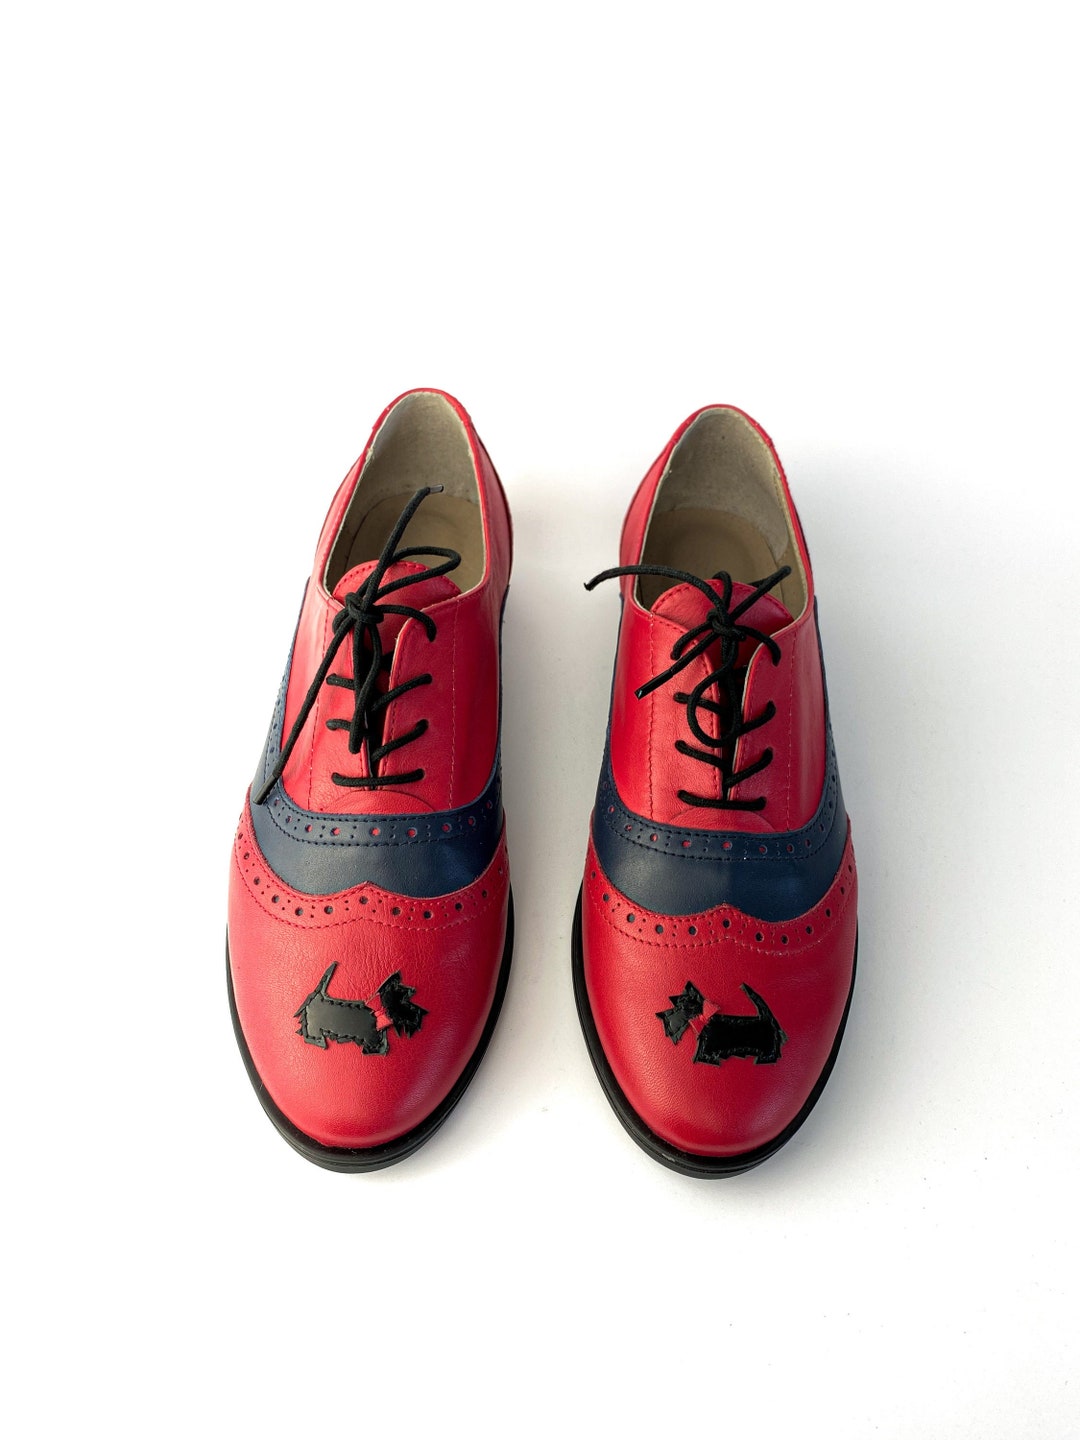 Women Oxford Shoes Red With Customizable Little Leather Dogs - Etsy